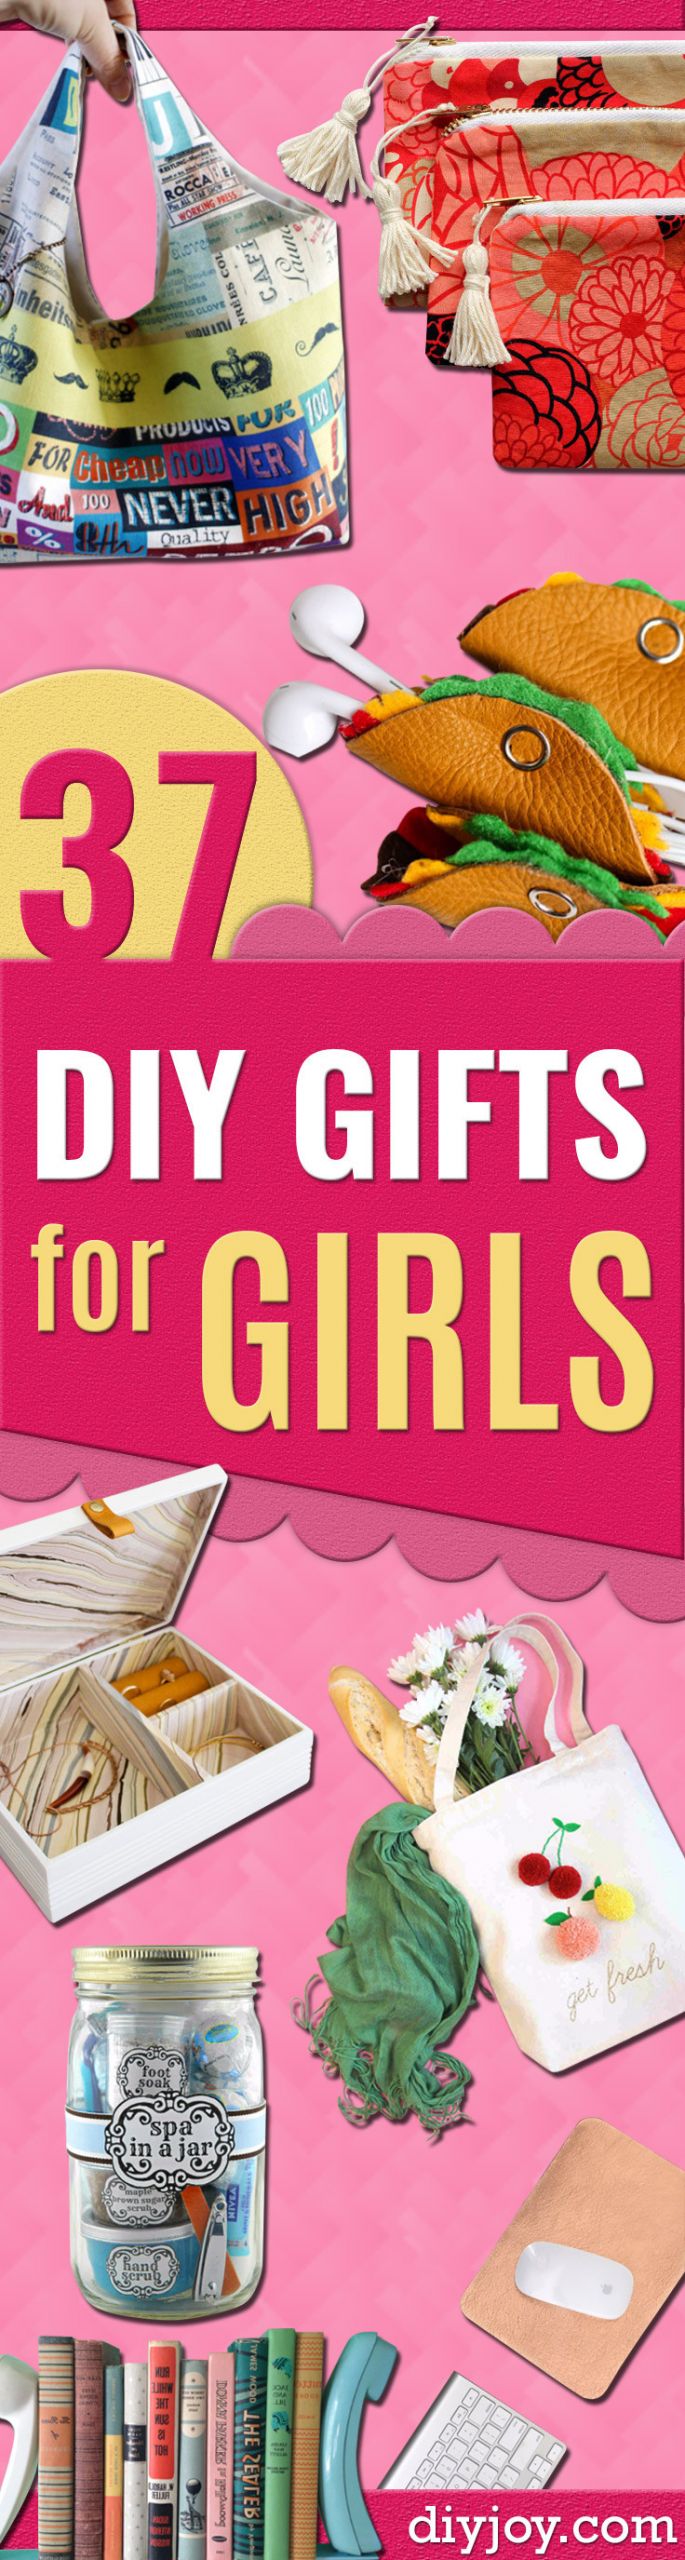 DIY Christmas Gifts For Girls
 37 DIY Gifts for Girls